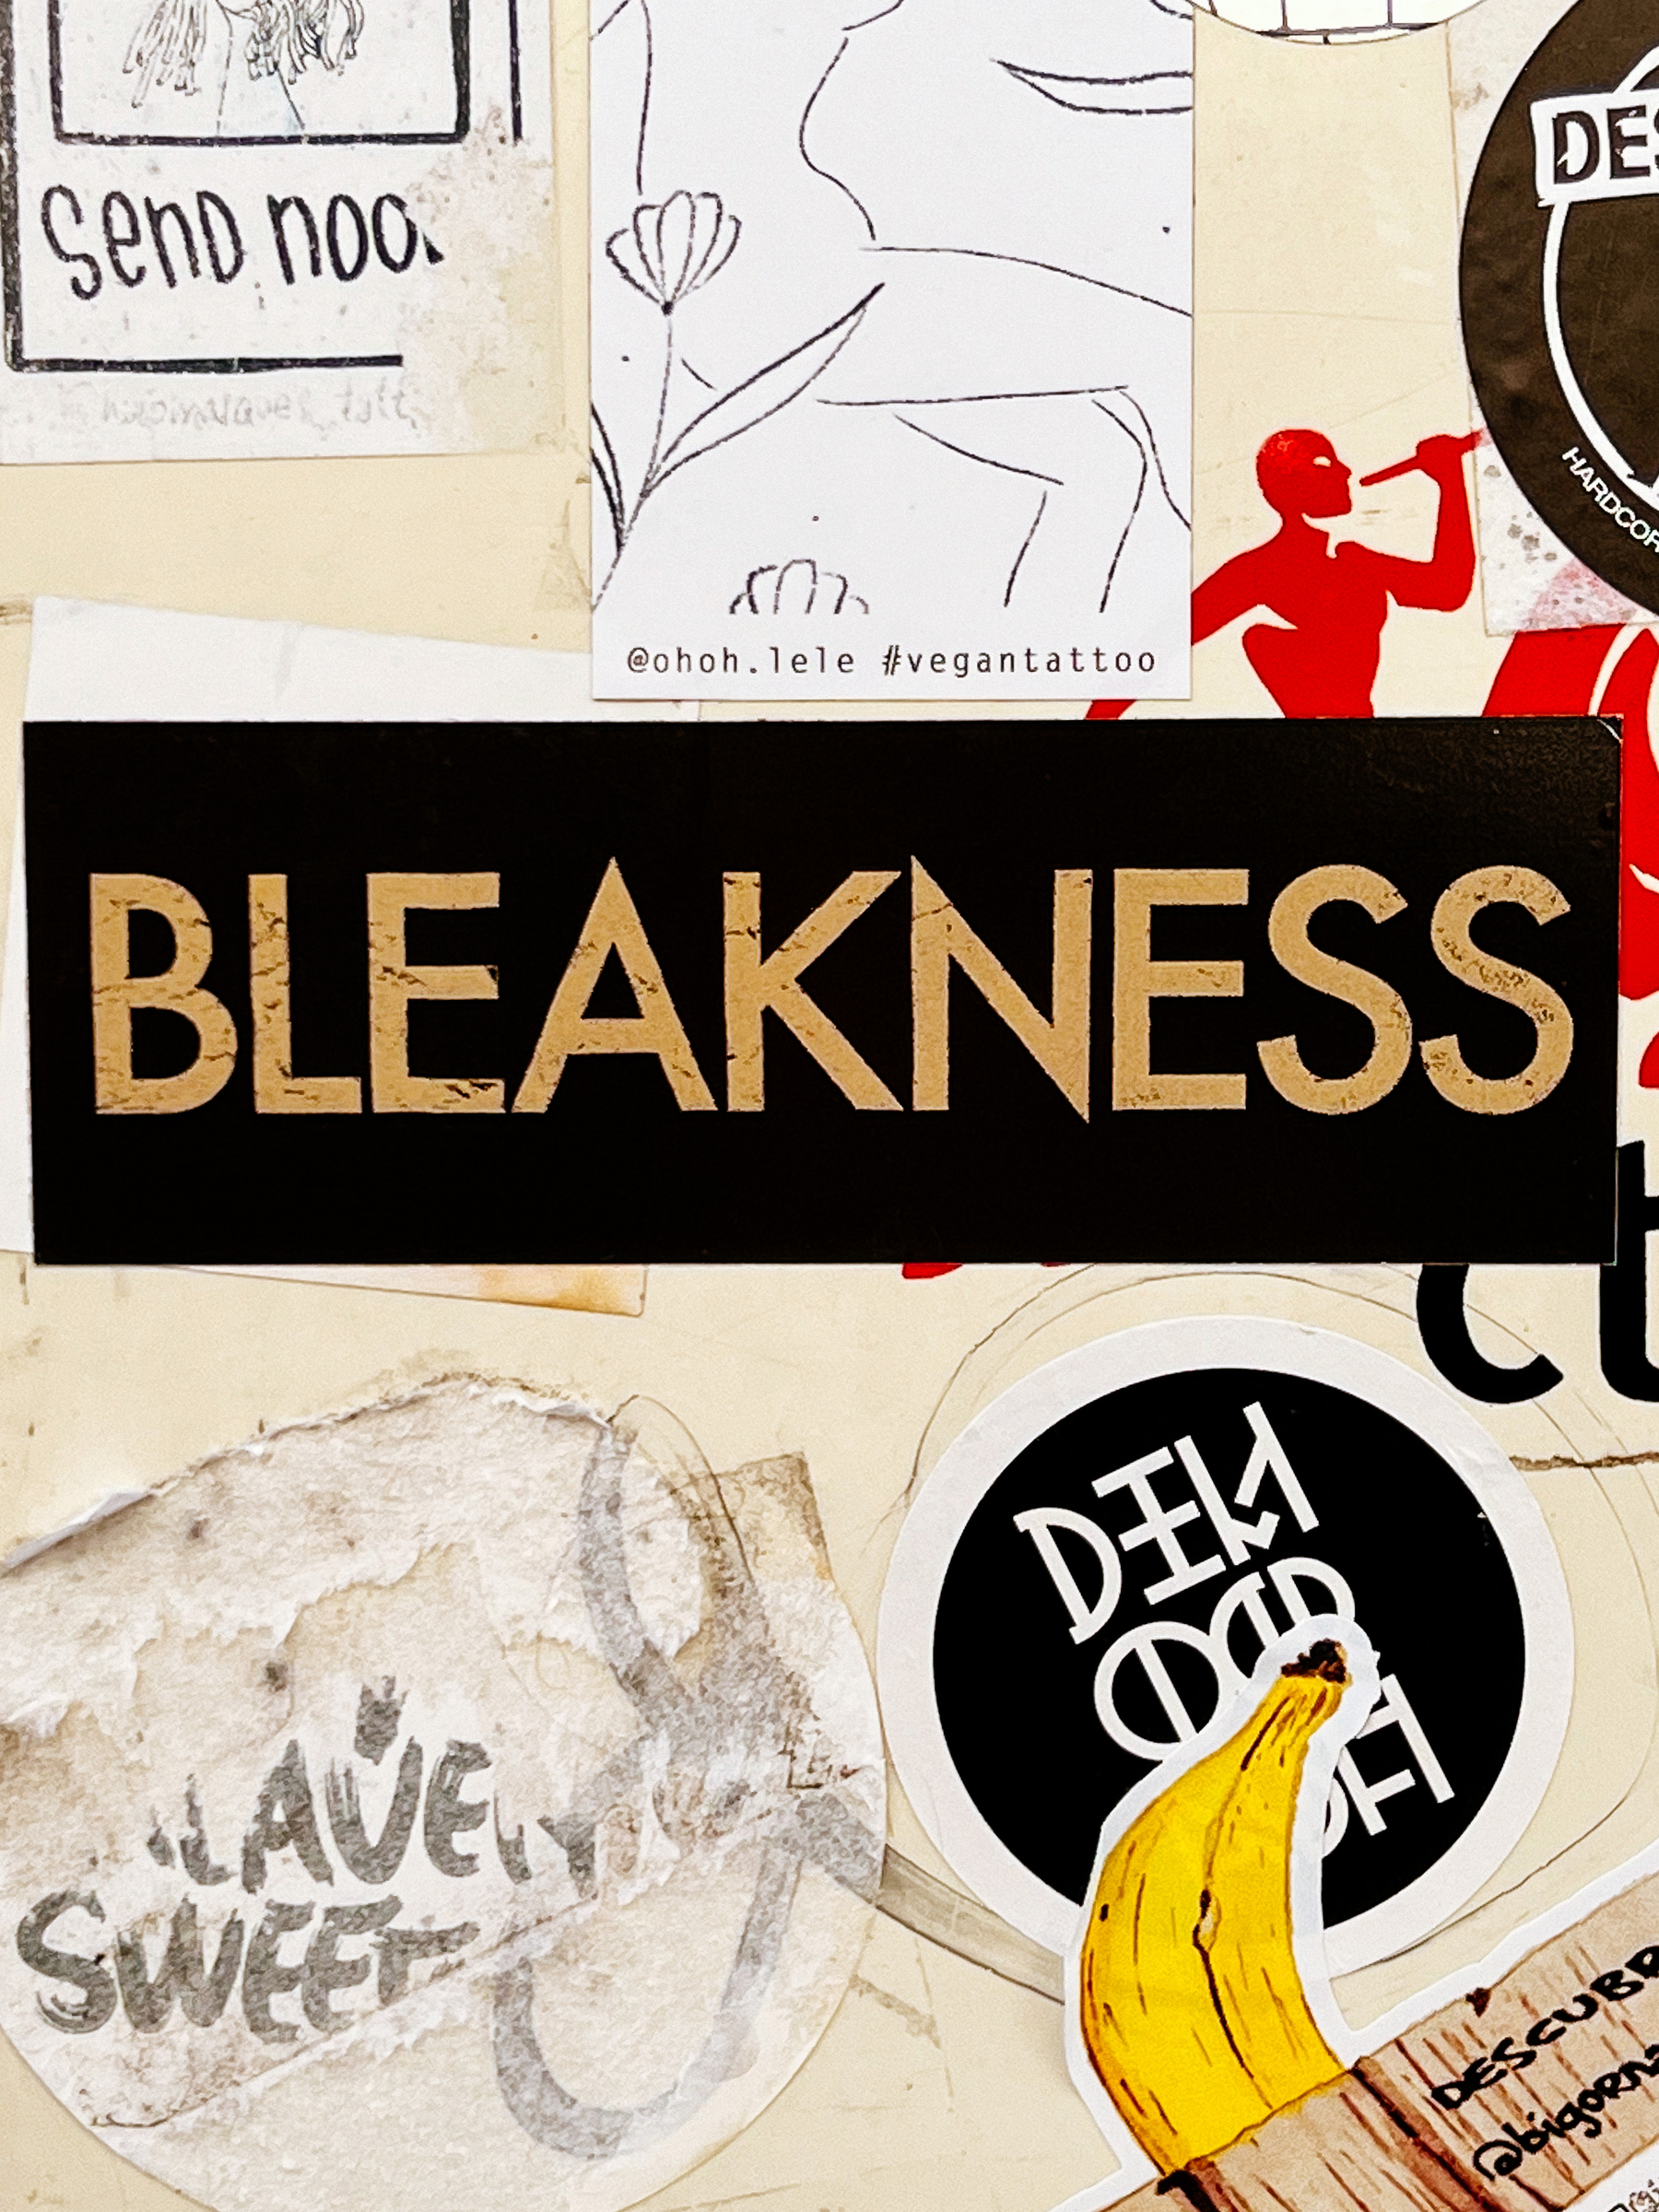 Sticker with the word “Bleakness”